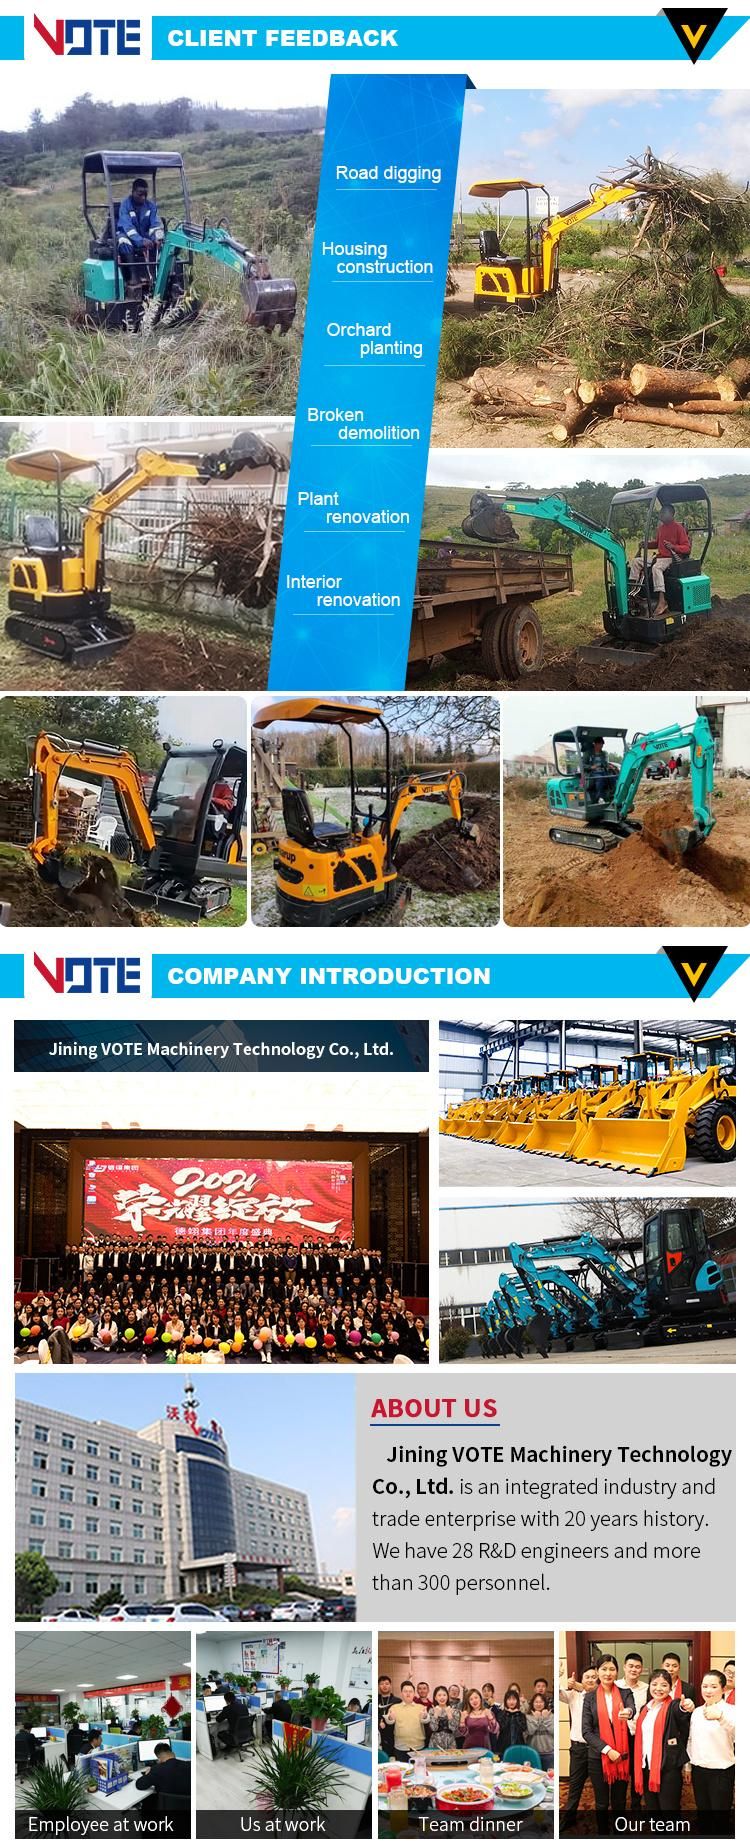 CE EPA 1.0 Ton Mini Excavator Prices with Crawler 2 Ton 3.0 Ton Excavator for Sale Fast Delivery Home Delivery